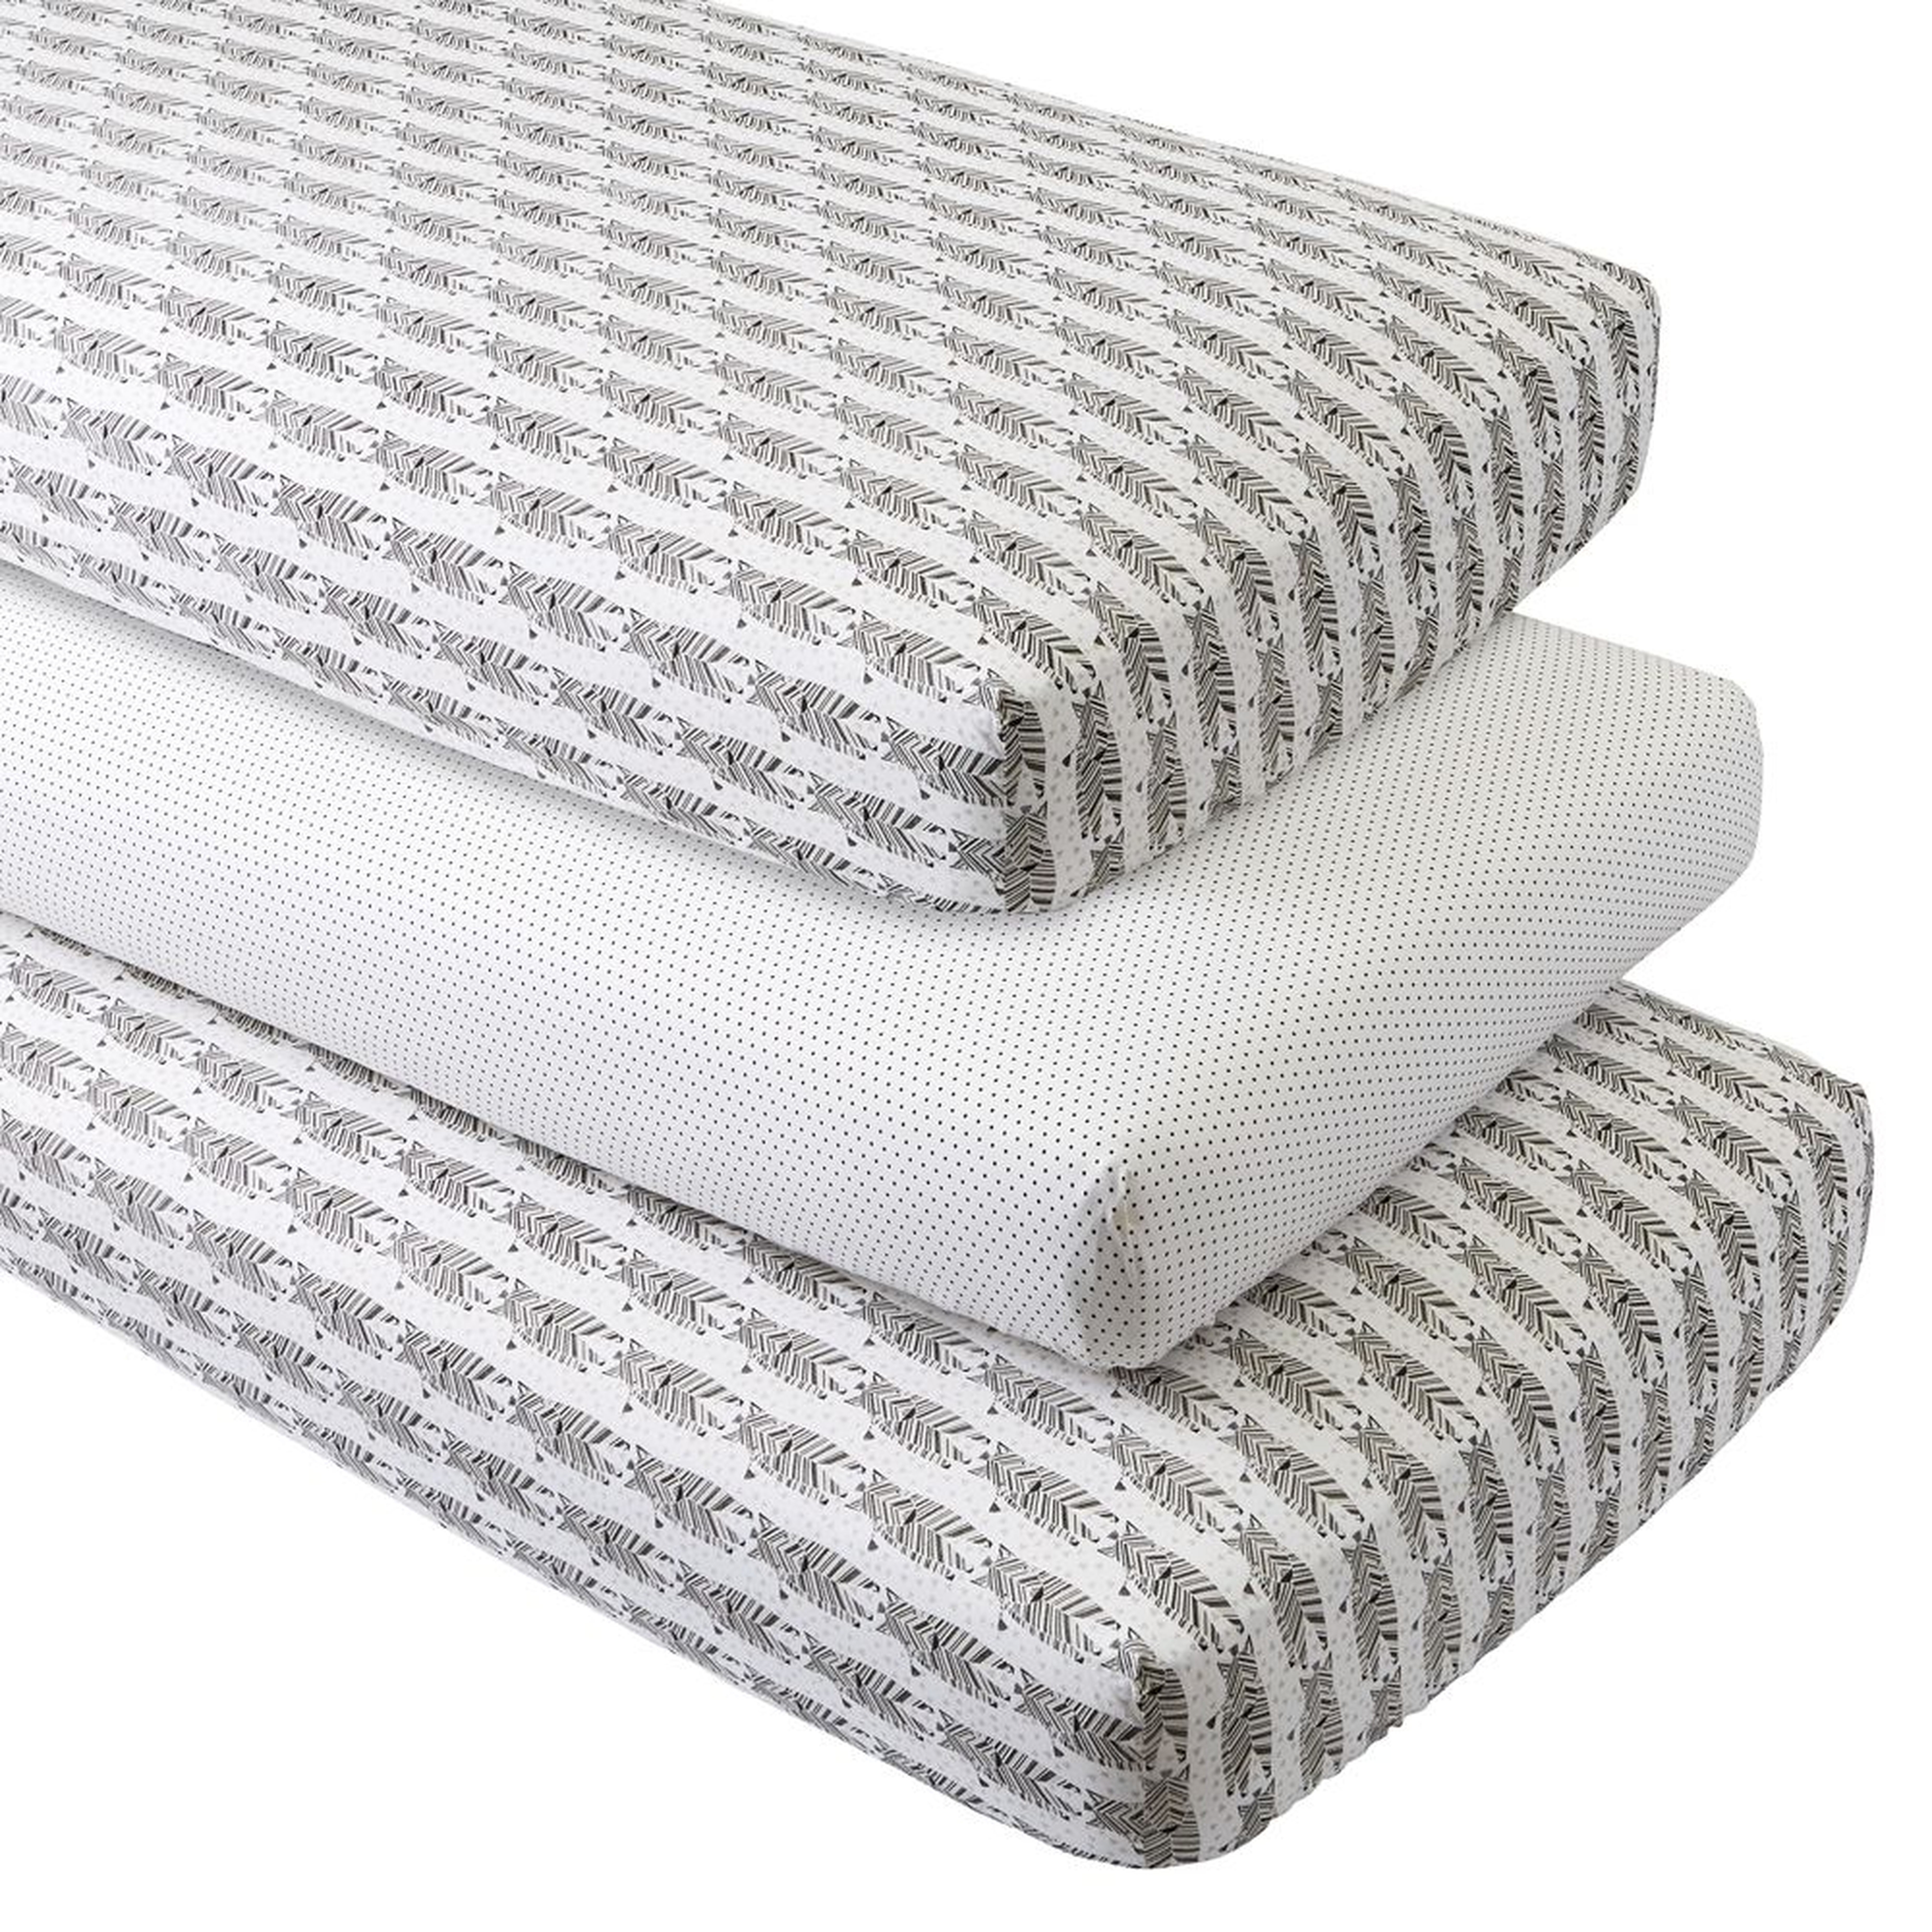 Organic Savanna Crib Fitted Sheets, Set of 3 - Crate and Barrel